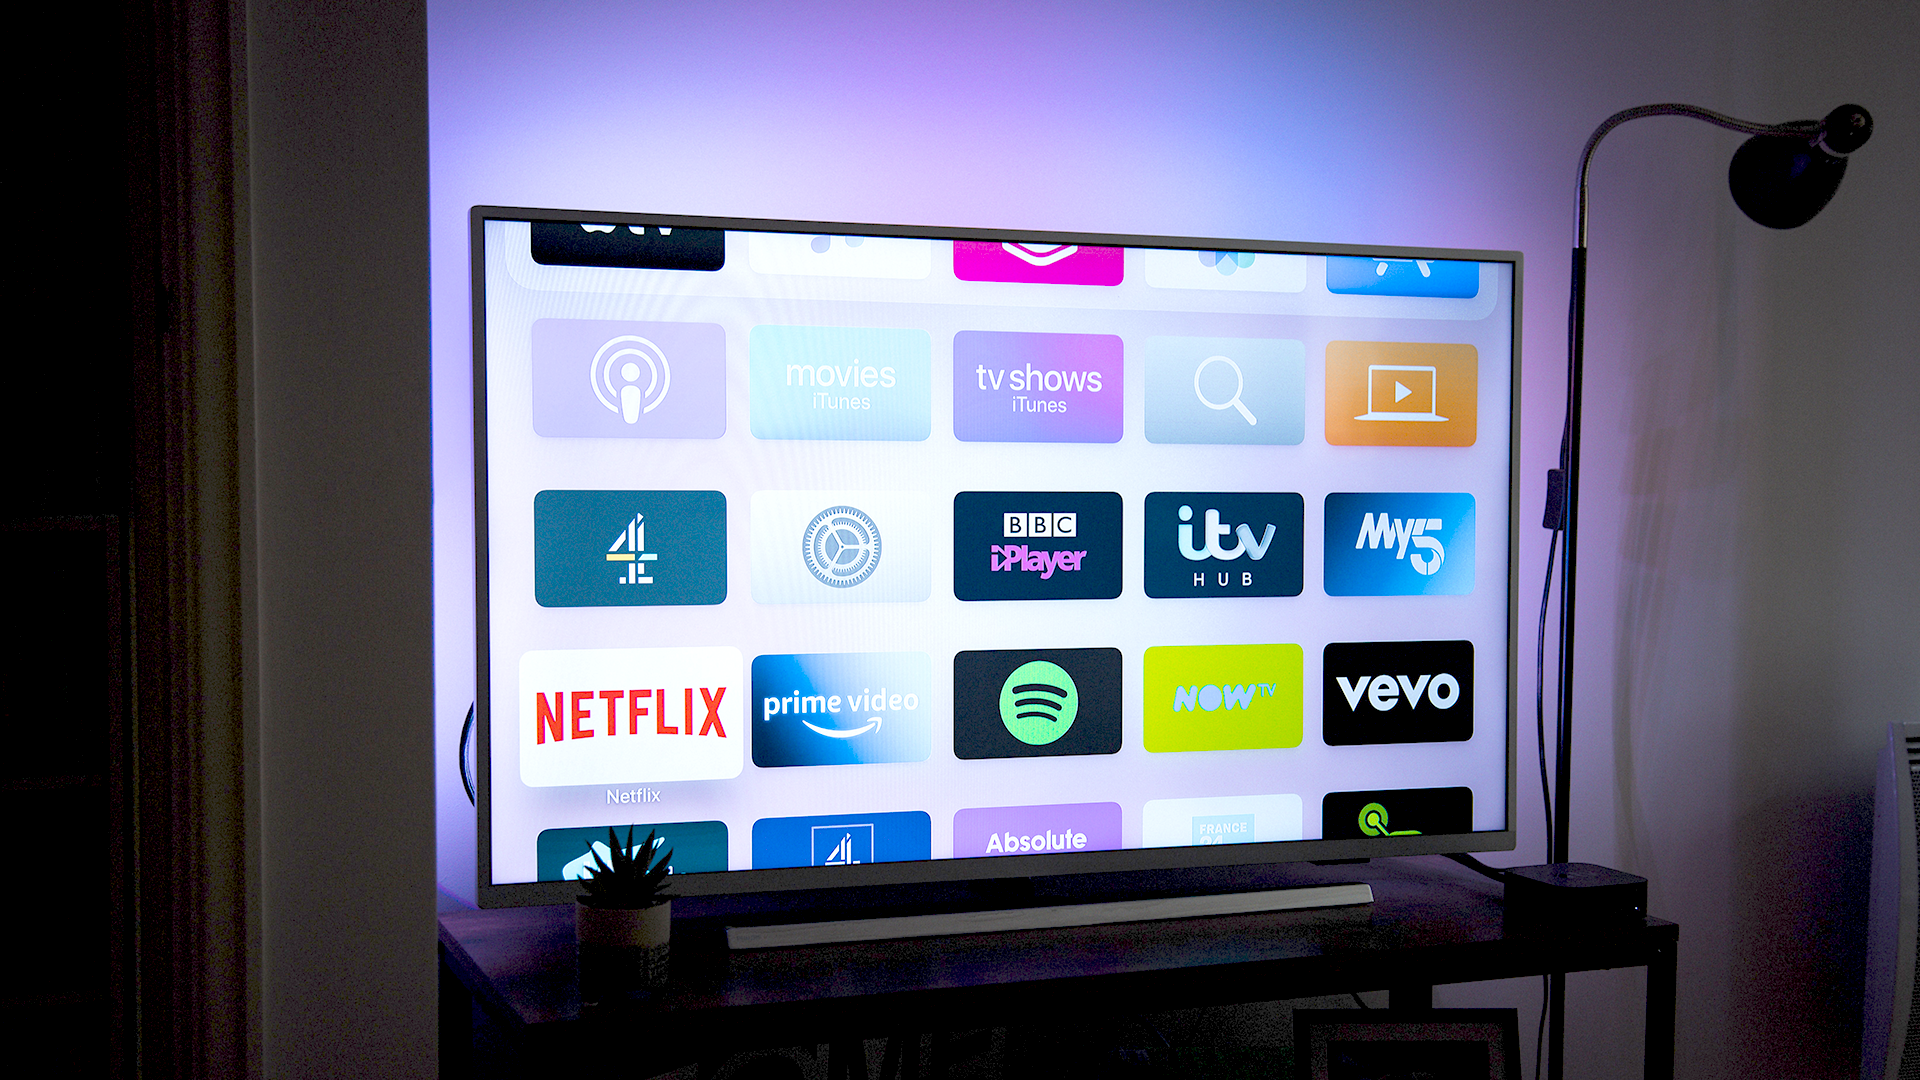 Image of a smart TV with apps on it